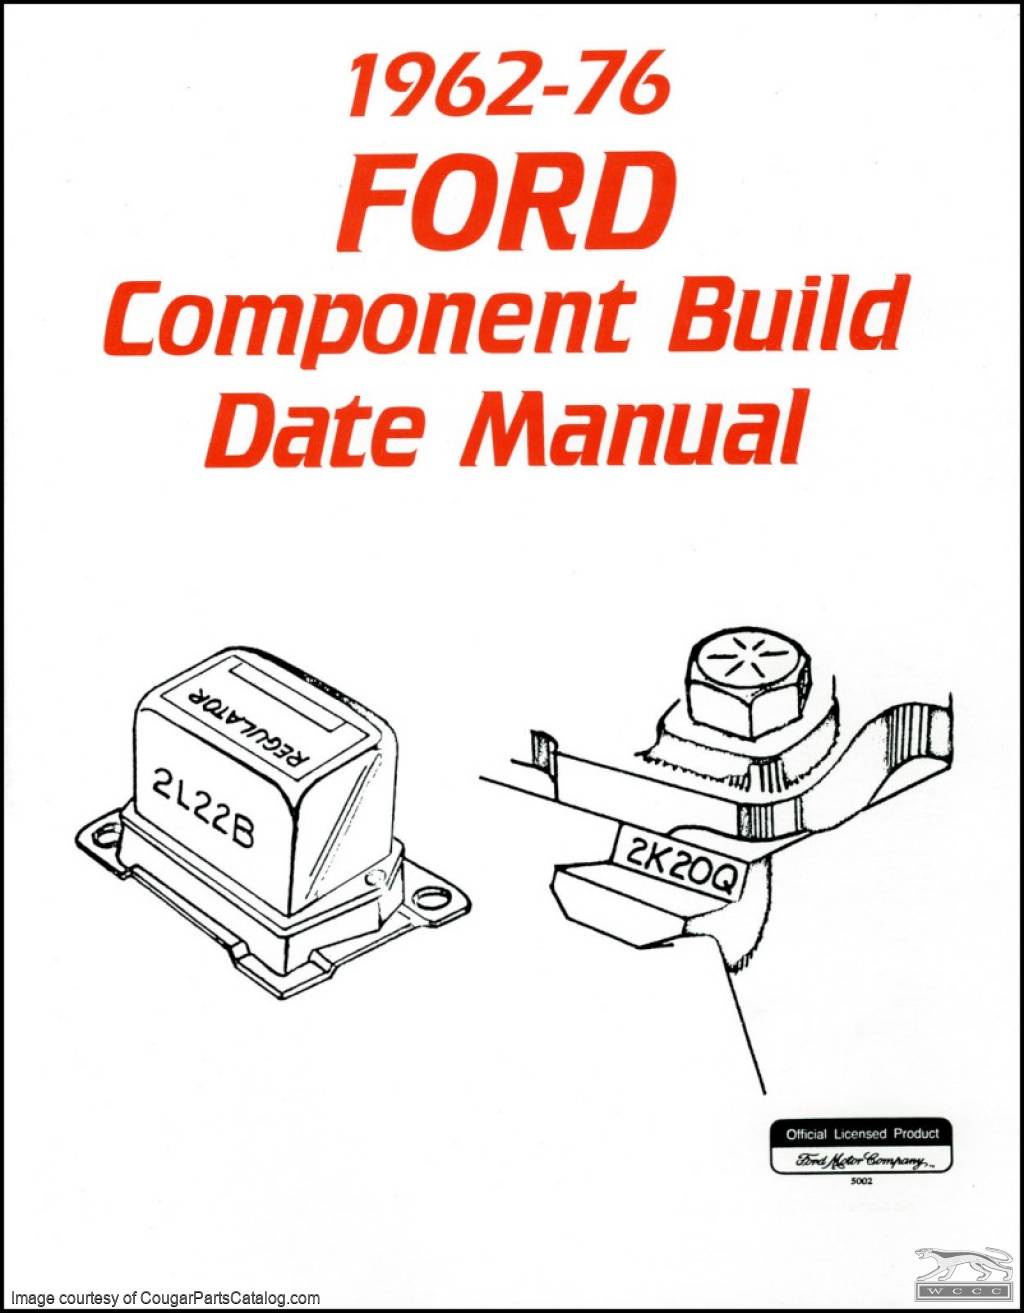 Manual - Component Build Date - Repro ~ 1967 - 1973 Mercury Cougar / 1964 - 1973 Ford Mustang / 1962 - 1976 All Mercury / 1962 - 1976 All Ford - 25951